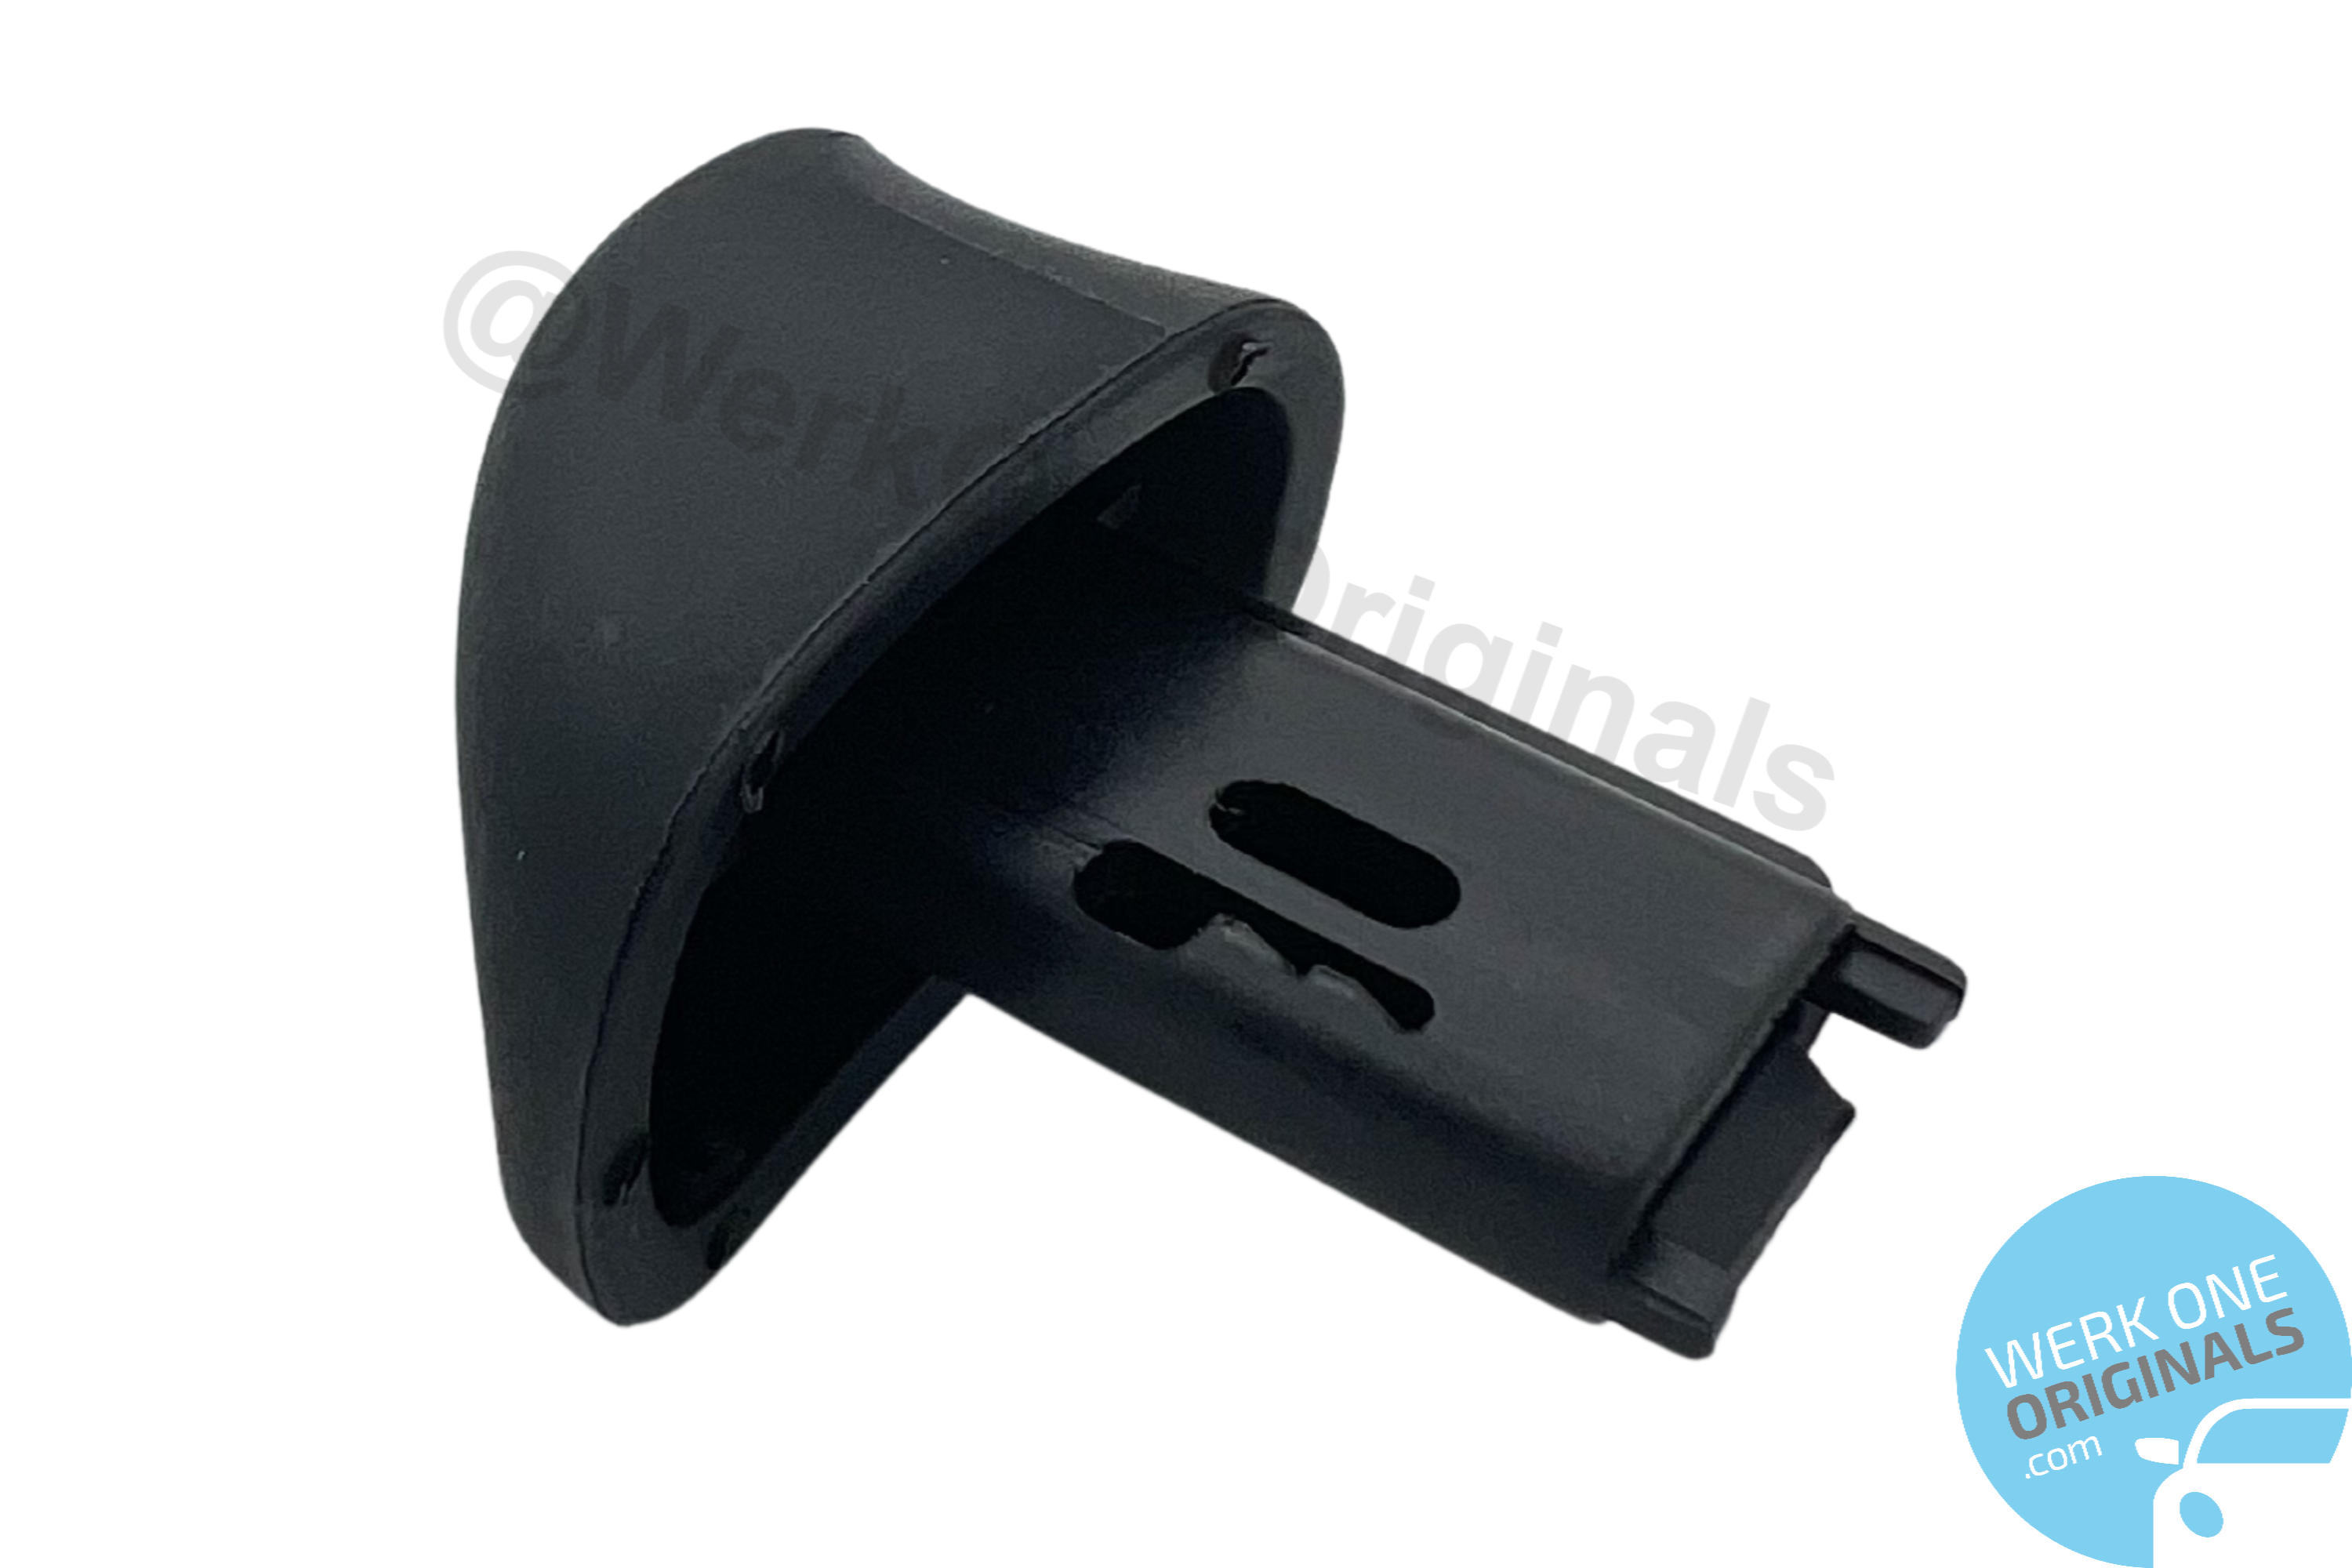 Porsche RH Seat Release Handle for Boxster Type 986 Models